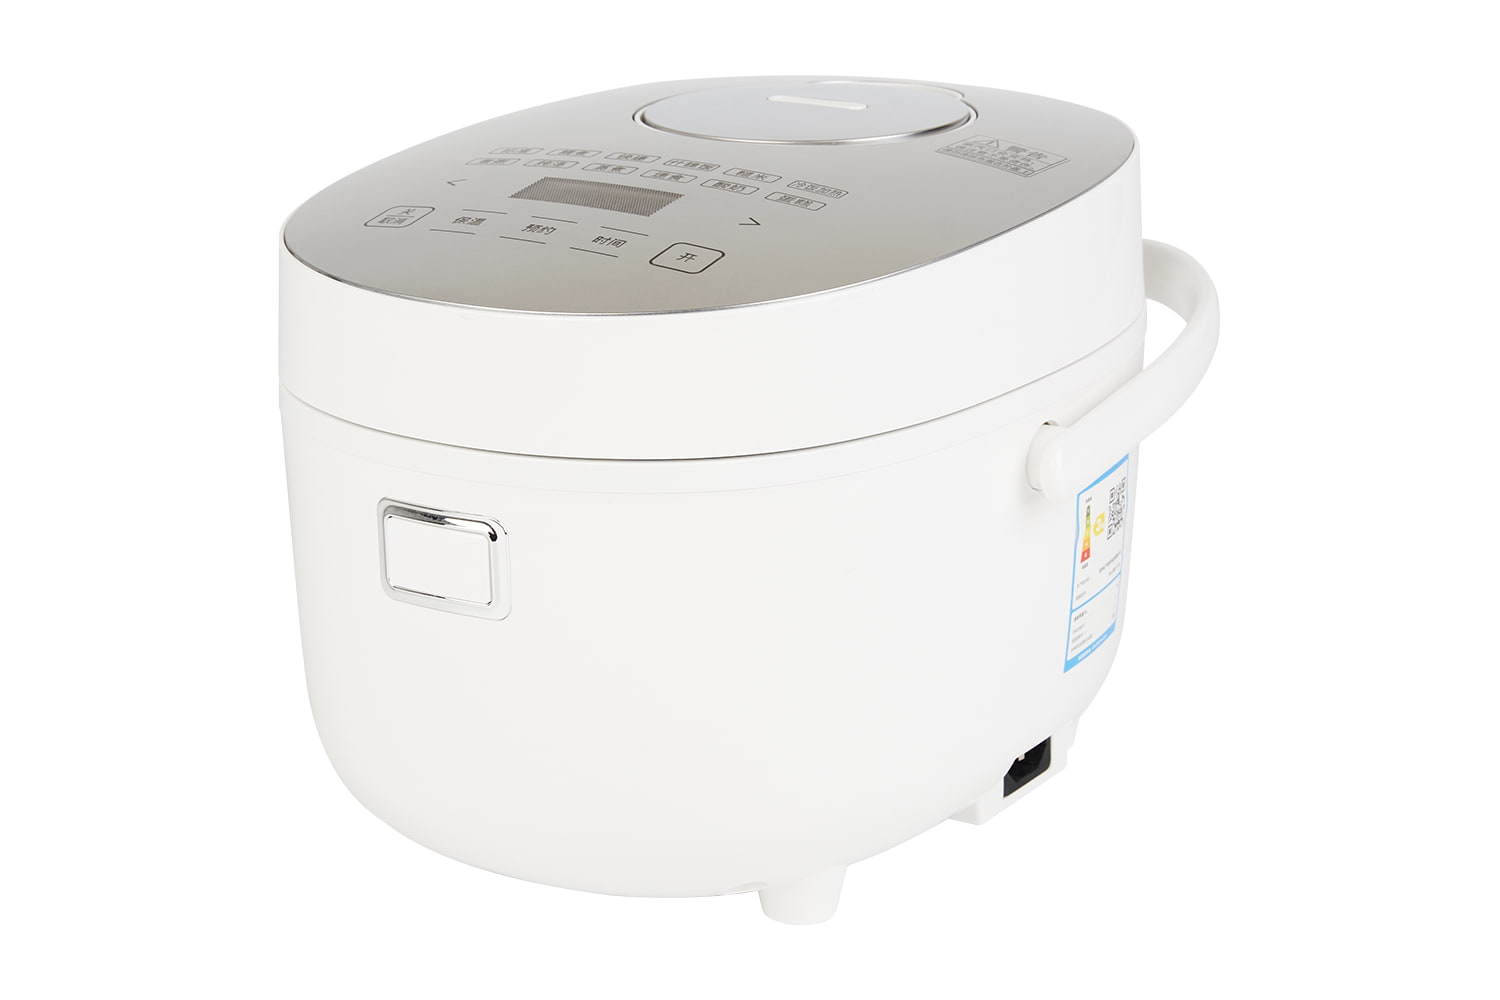 YYF-20FS02 2L IH/heating plate Multifunction Rice Cooker, 12 Menu , Steam, Soup, Cake